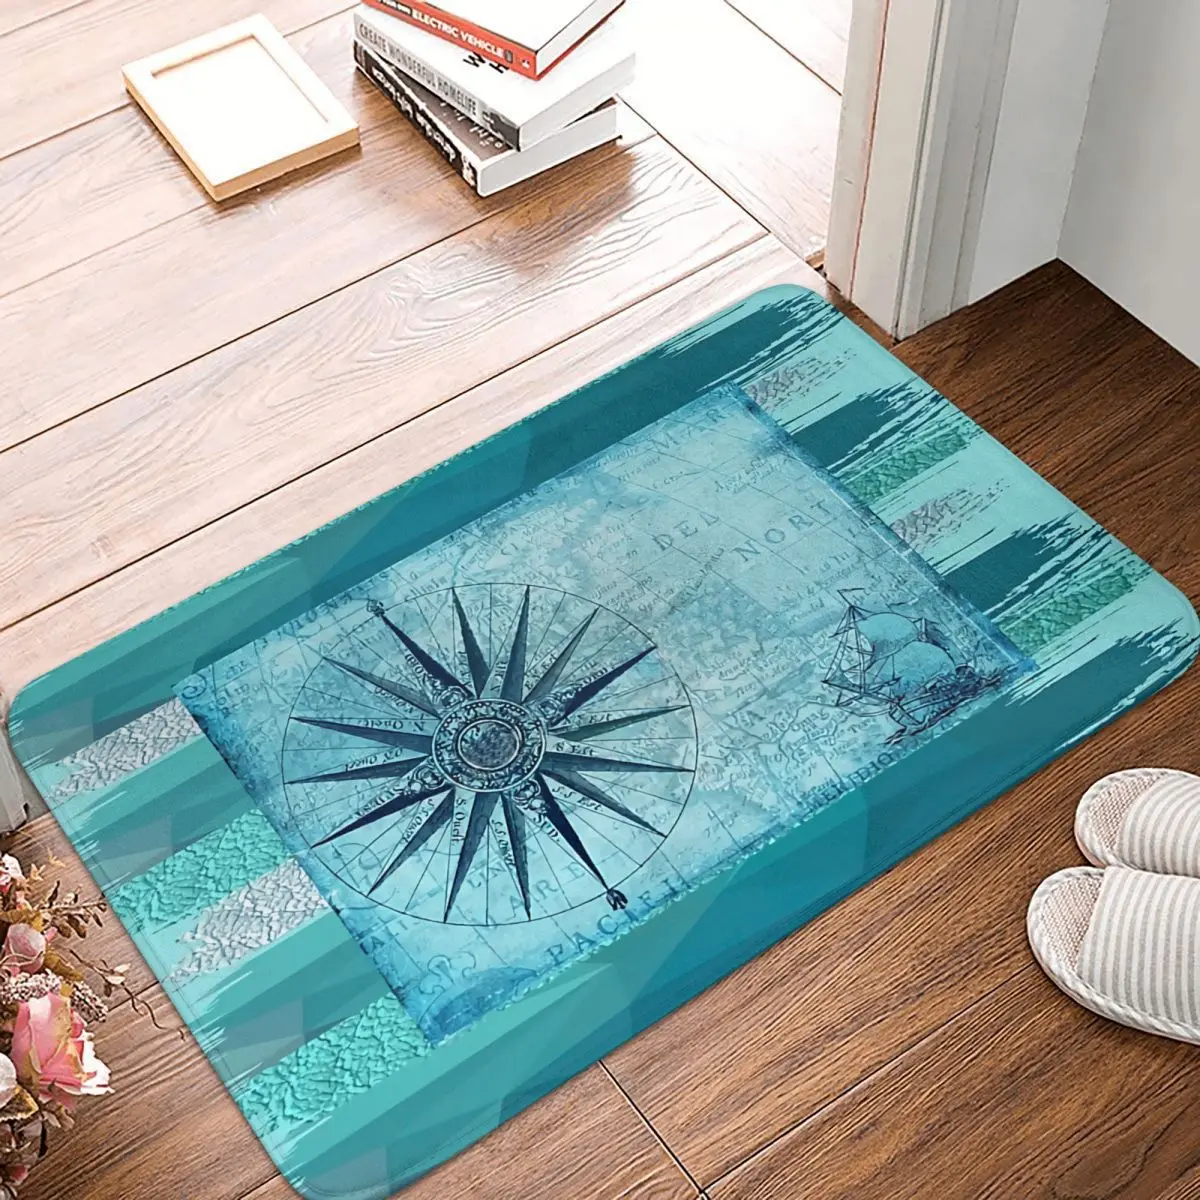 

Anchor Non-slip Doormat Ocean Blues And Greens With Nautical Bath Kitchen Mat Welcome Carpet Flannel Modern Decor